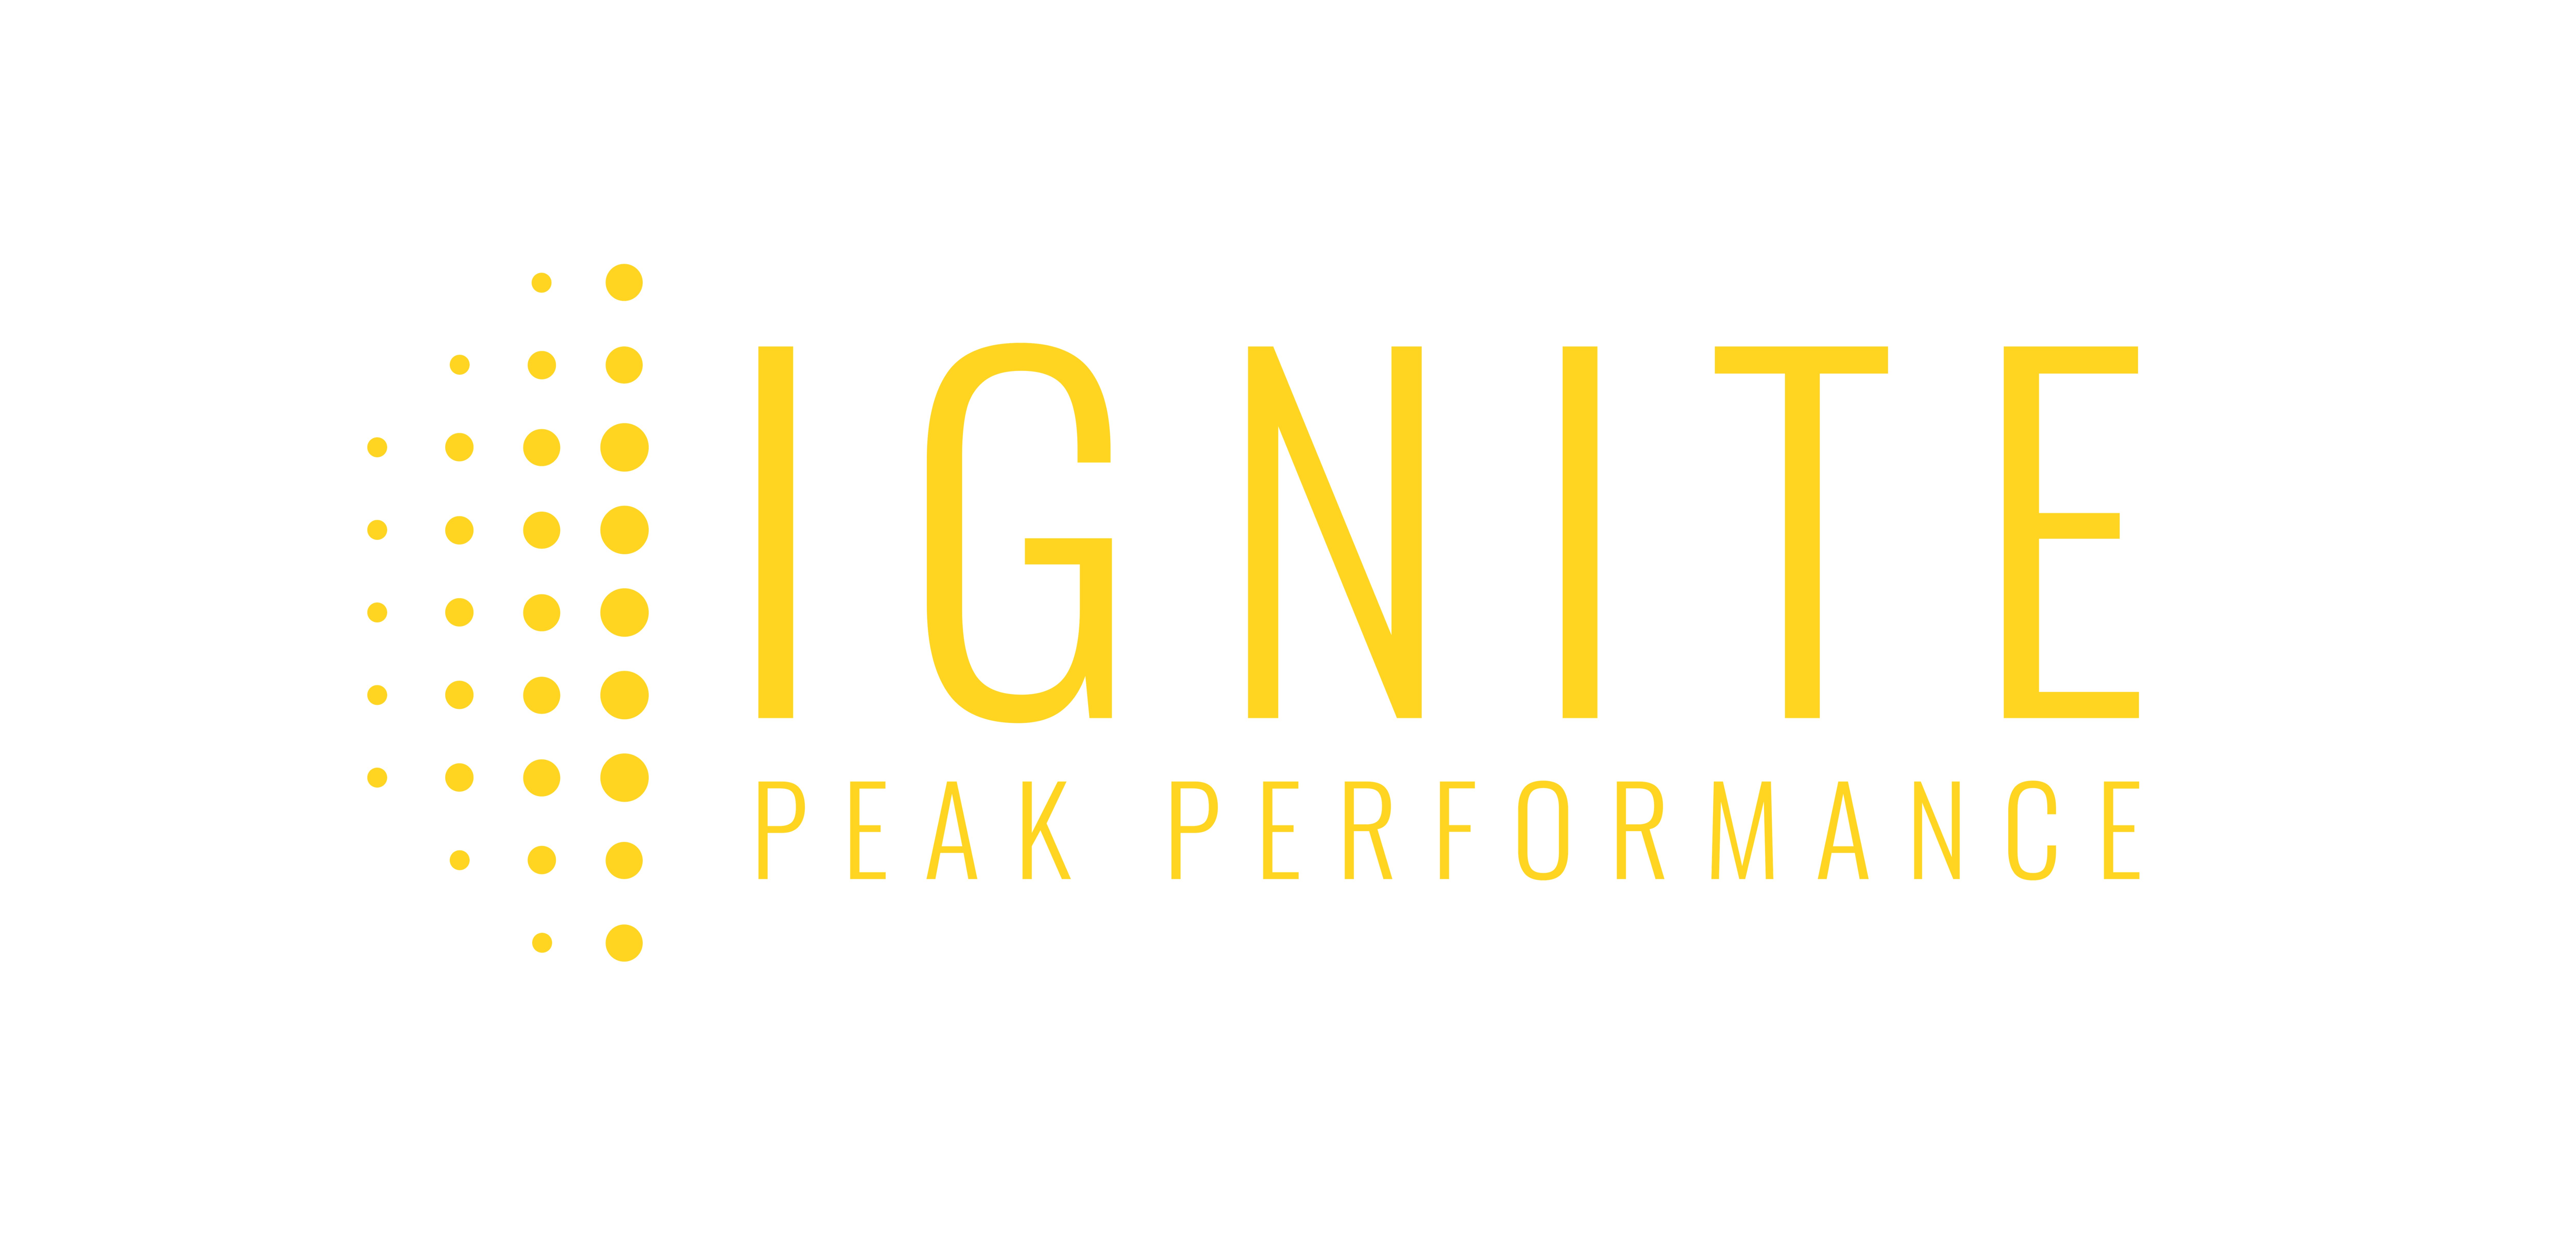 Ignite Peak Performance logo with yellow dots in vertical lines increasing in length from left to right on the left hand side of the large words that read ‘IGNITE peak performance’